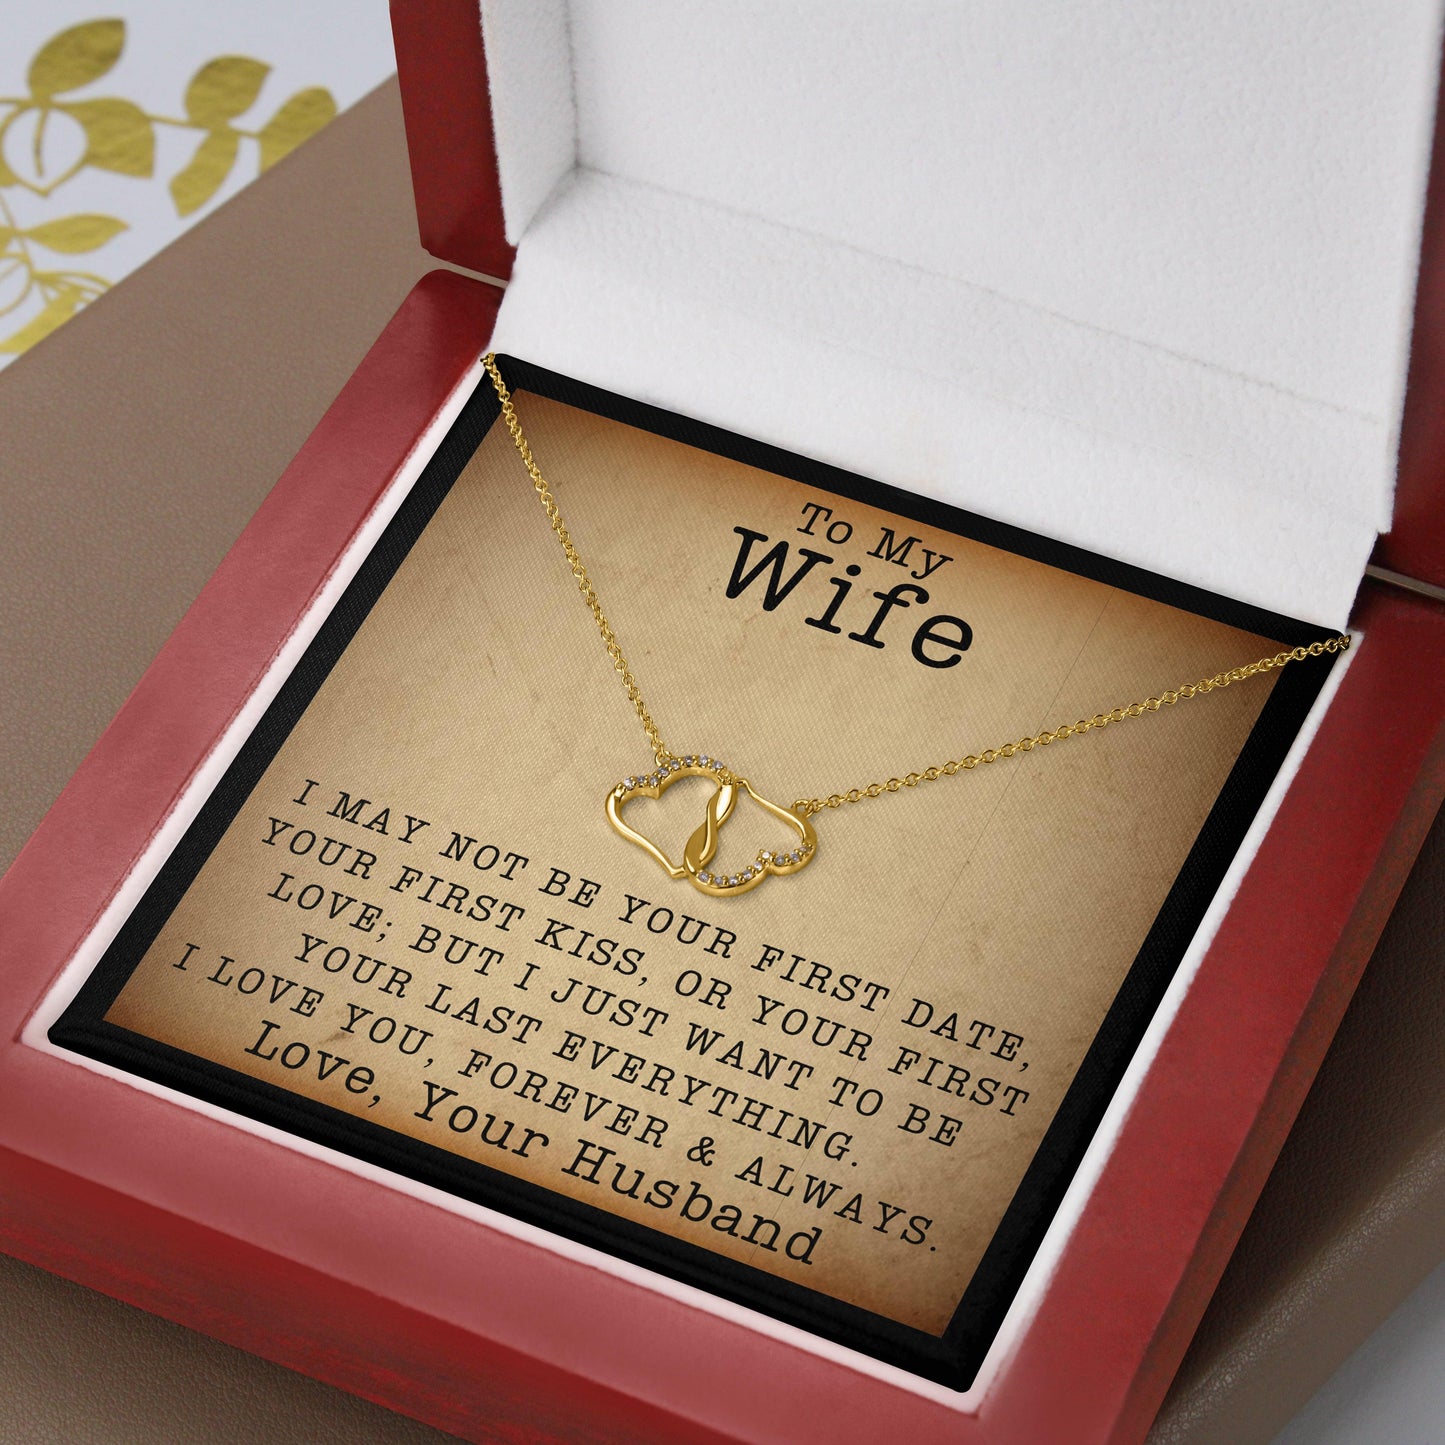 Jewelry gifts (Wife) Last Everything - Solid Gold with Diamonds Necklace - Belesmé - Memorable Jewelry Gifts 